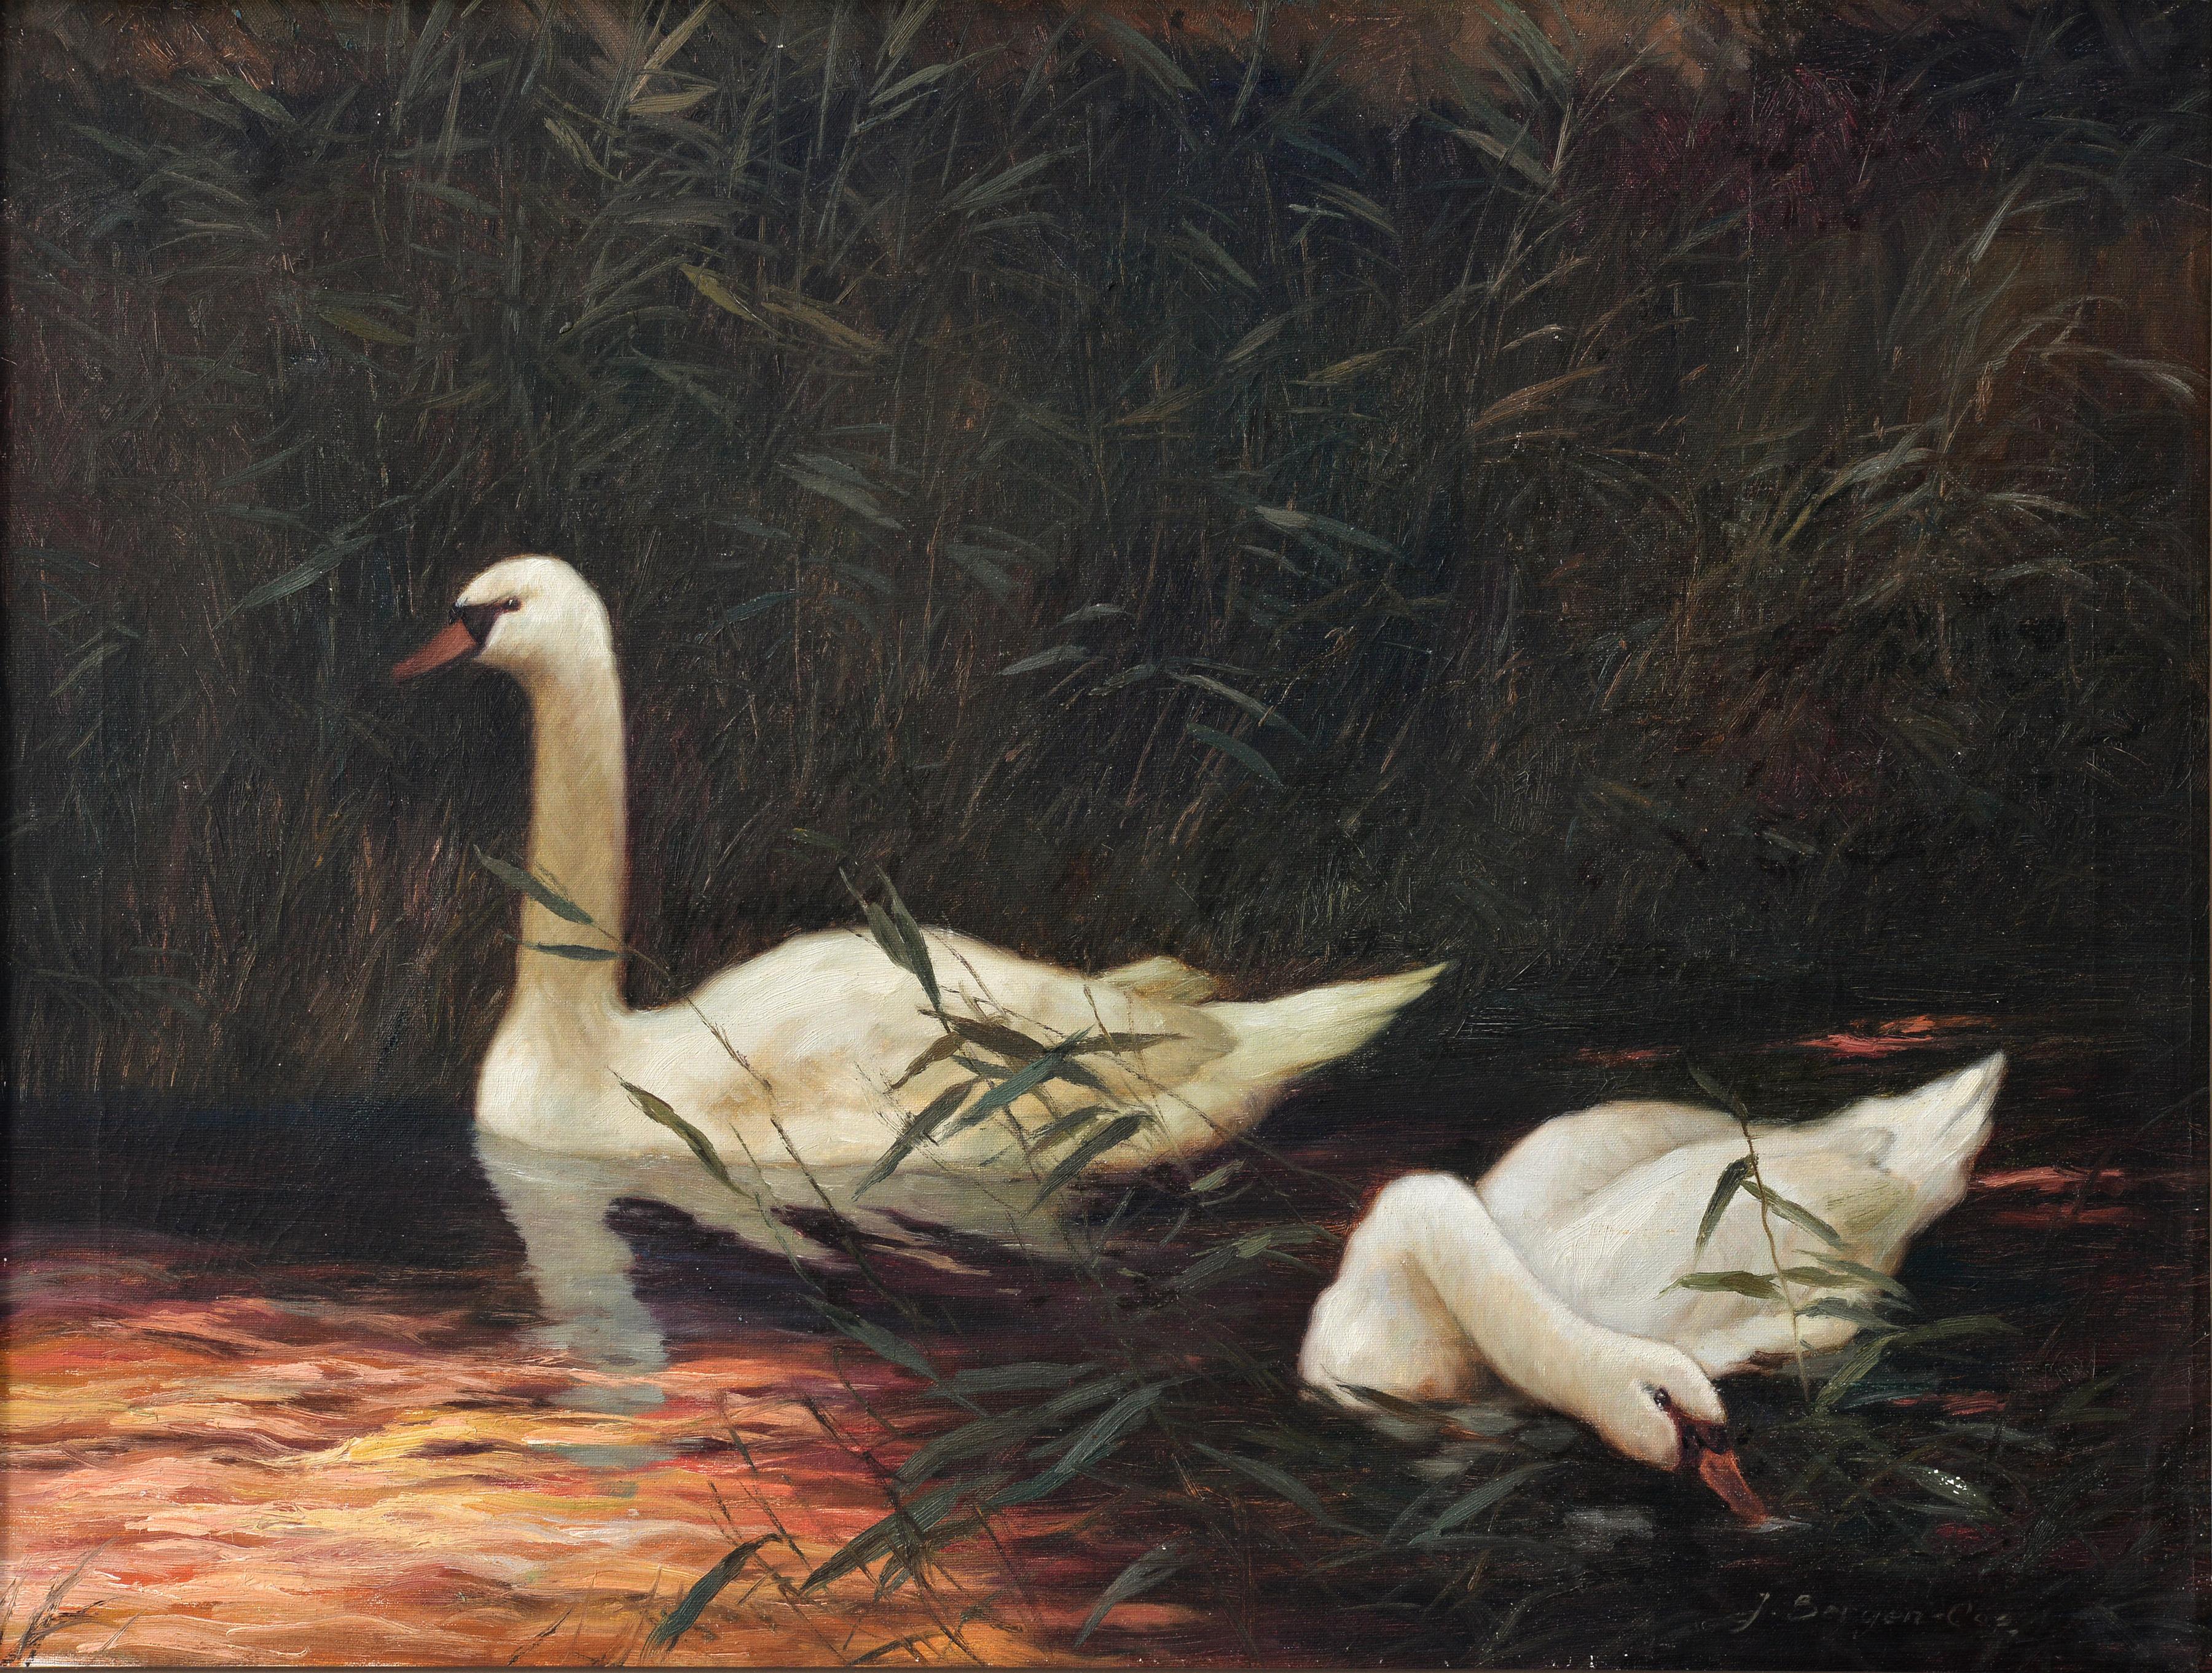 Pair of Snow White Swans at Sunset mid 20th century Vintage Oil Painting Signed - Brown Landscape Painting by Unknown